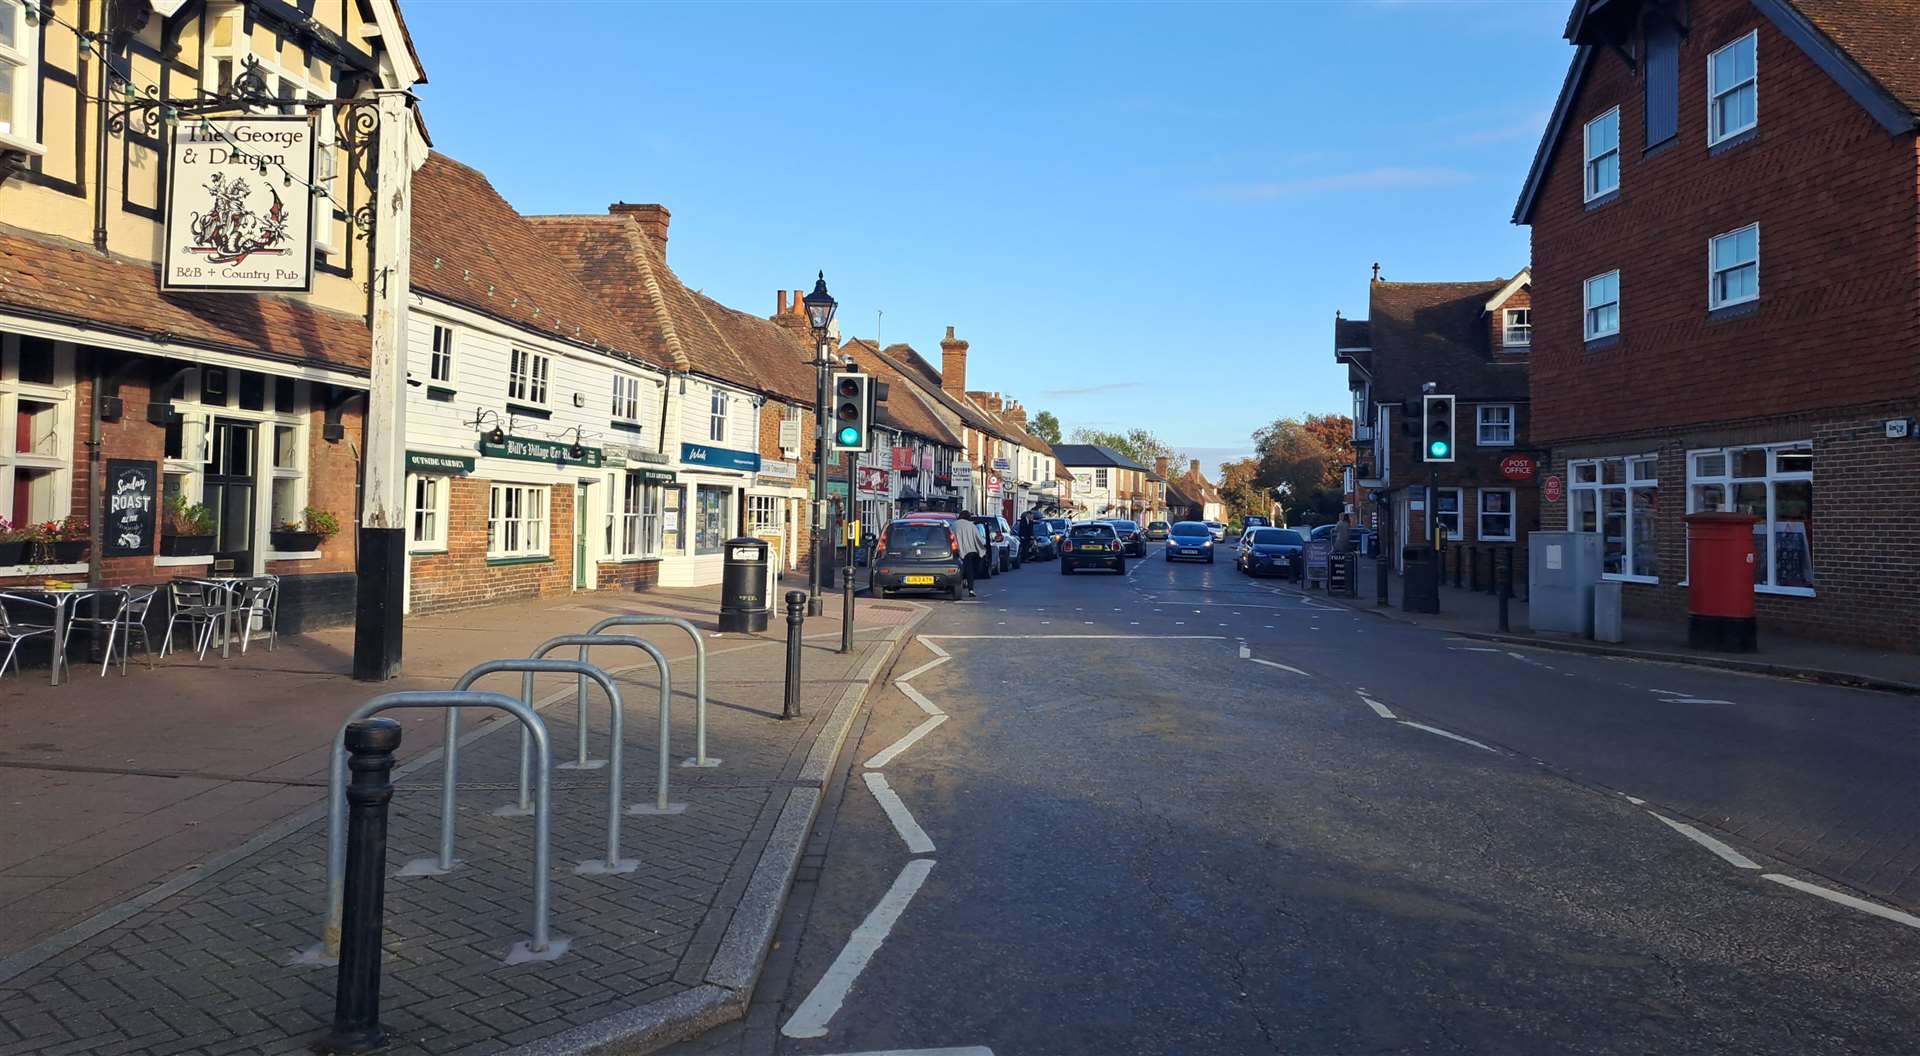 Voters in Headcorn will have a new MP after the next election, because their constituency is changing